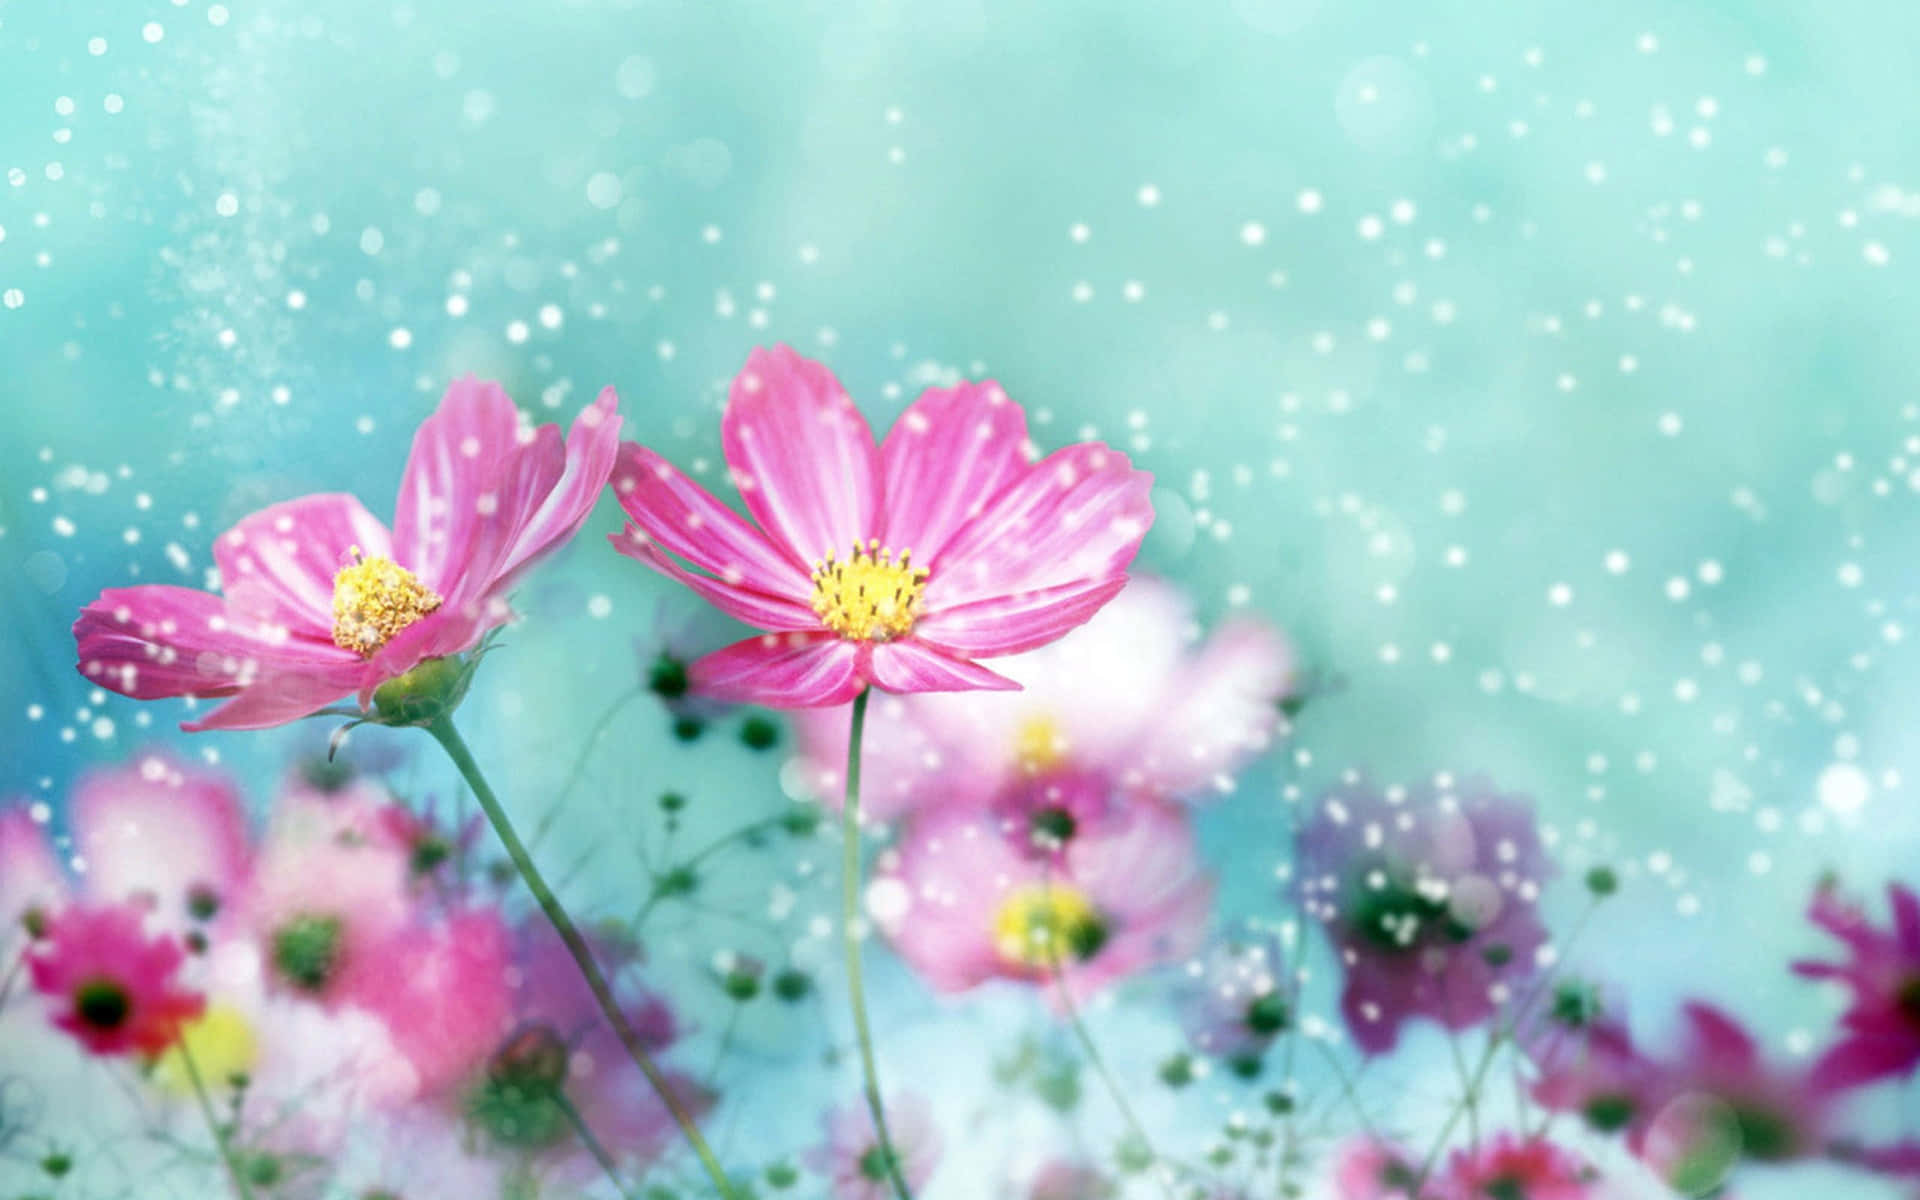 Adorable Kawaii Flower Blossoming in Vibrant Colors Wallpaper